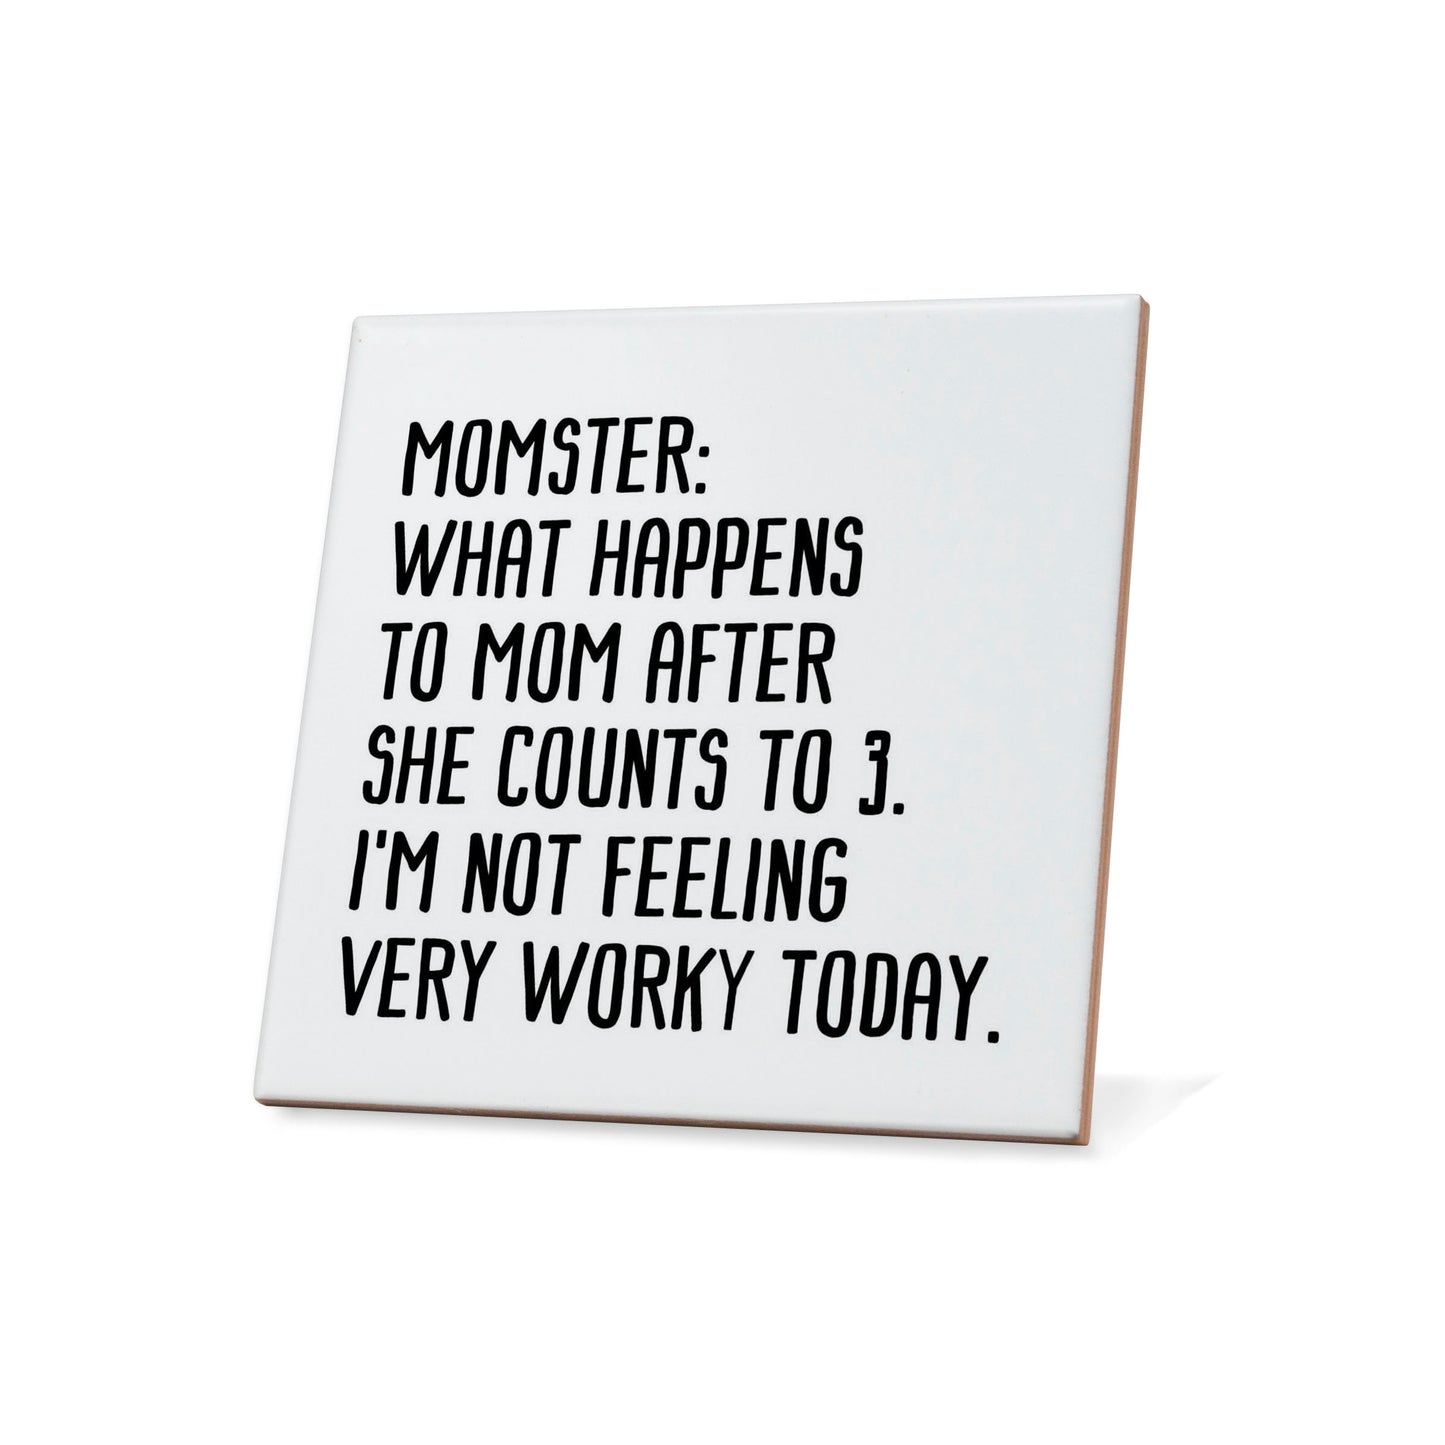 Momster: what happens to mom after she counts to 3. Quote Coaster